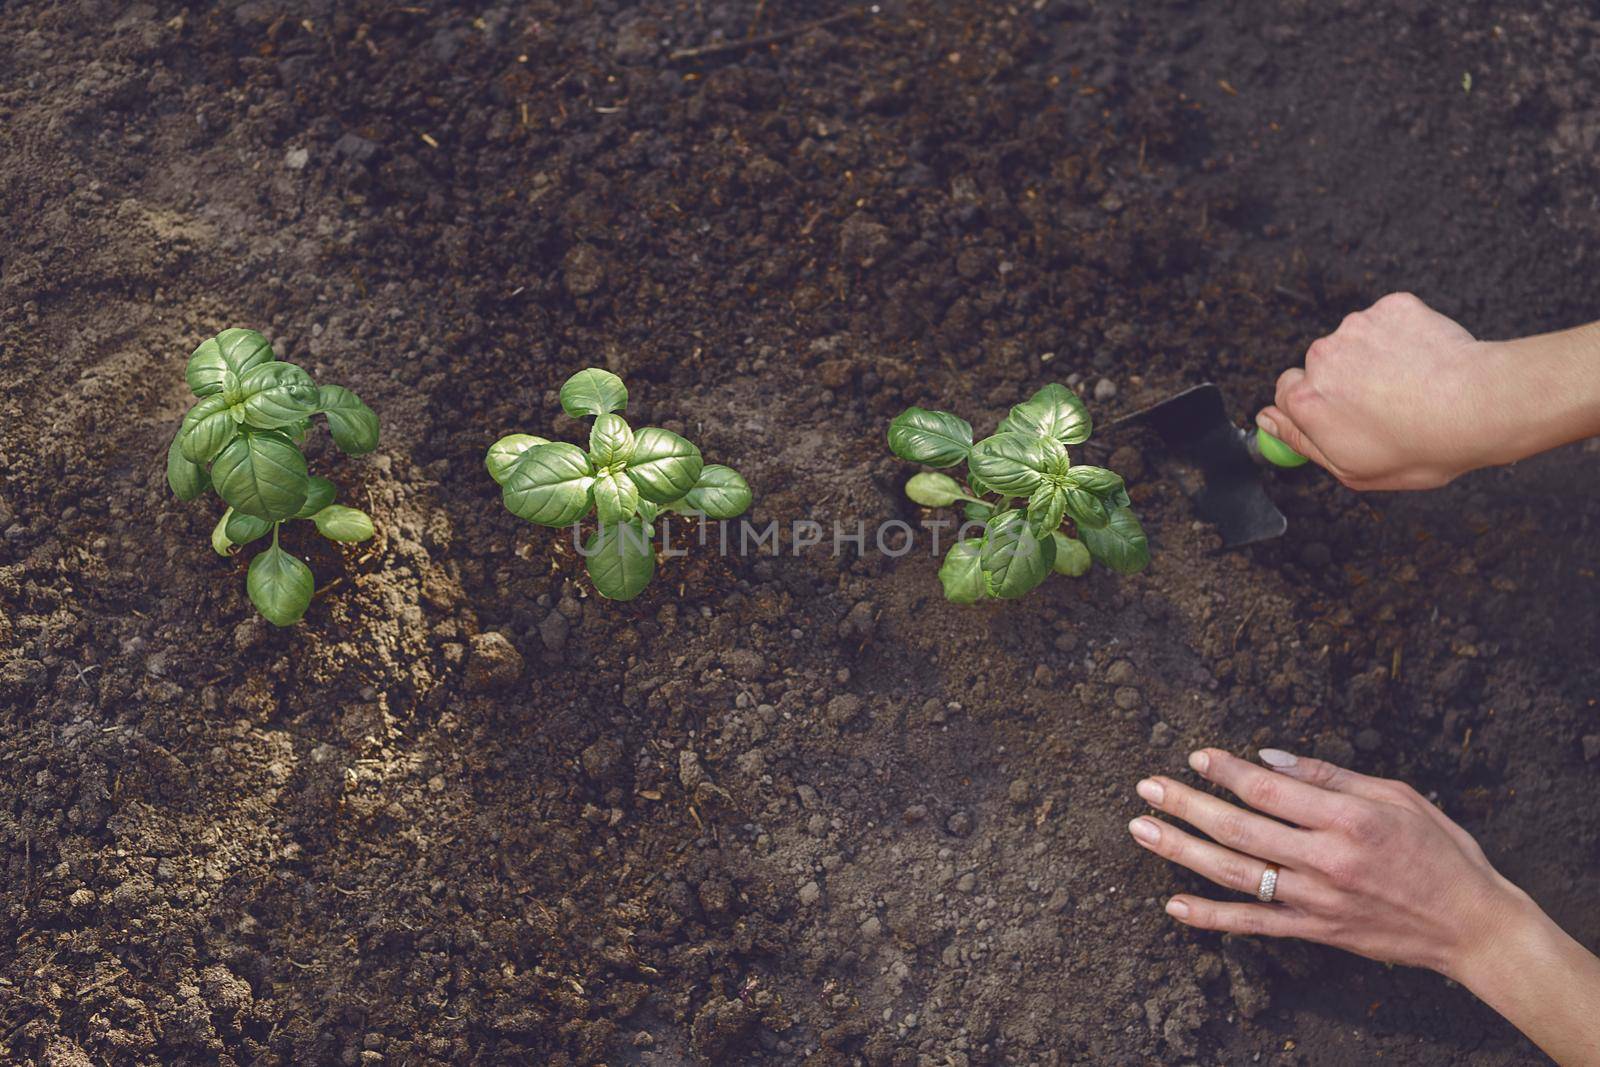 Hands of unrecognizable woman agronomist are digging by small garden shovel, planting green basil sprouts or plants in fertilized ground. Close-up by nazarovsergey